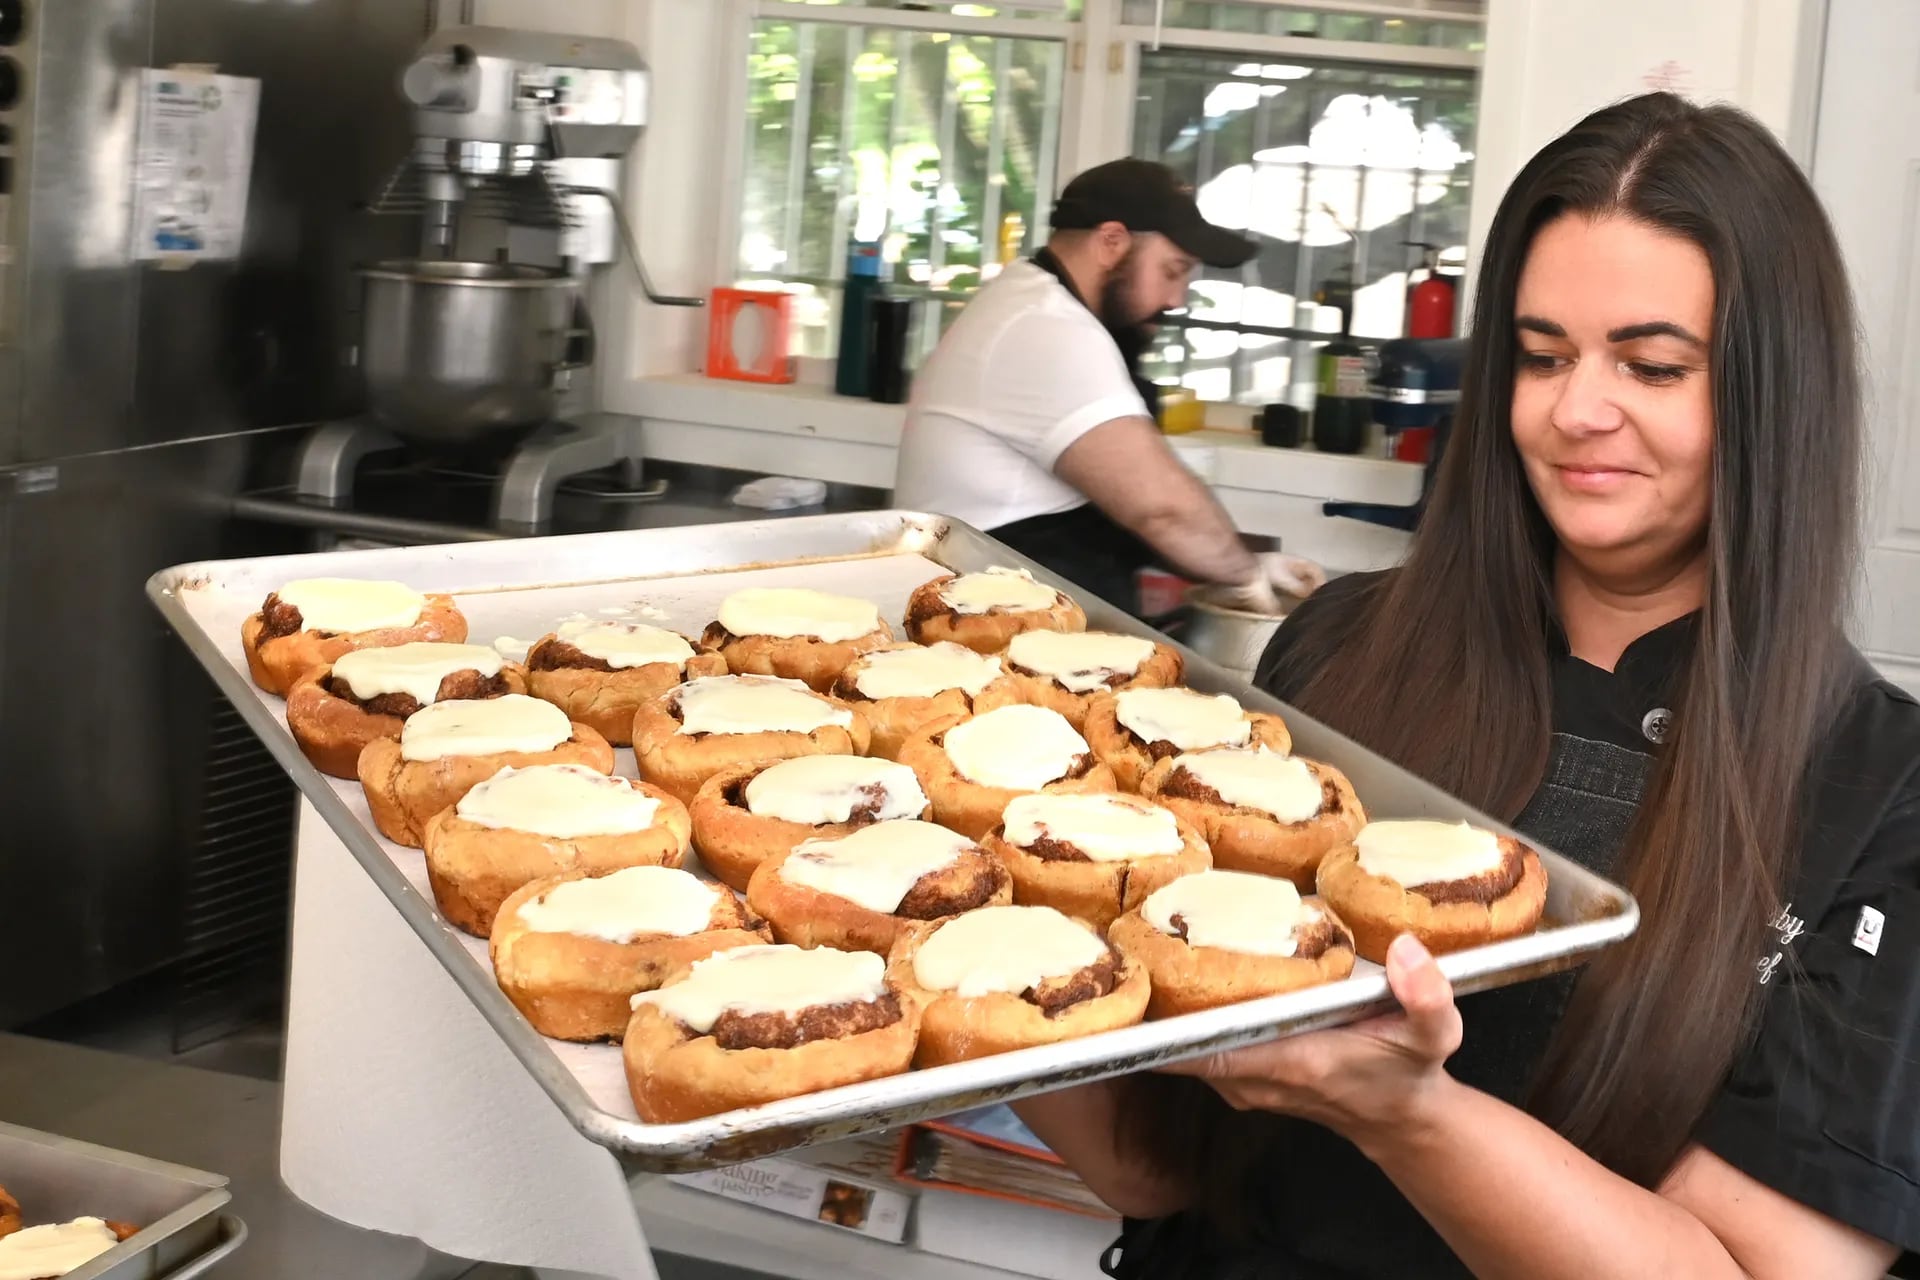 Chef owner Jenna Kisby carries a tray of cinnamon buns topped with cream cheese frosting at Kizbee’s Kitchen in Egg Harbor City, N.J. 